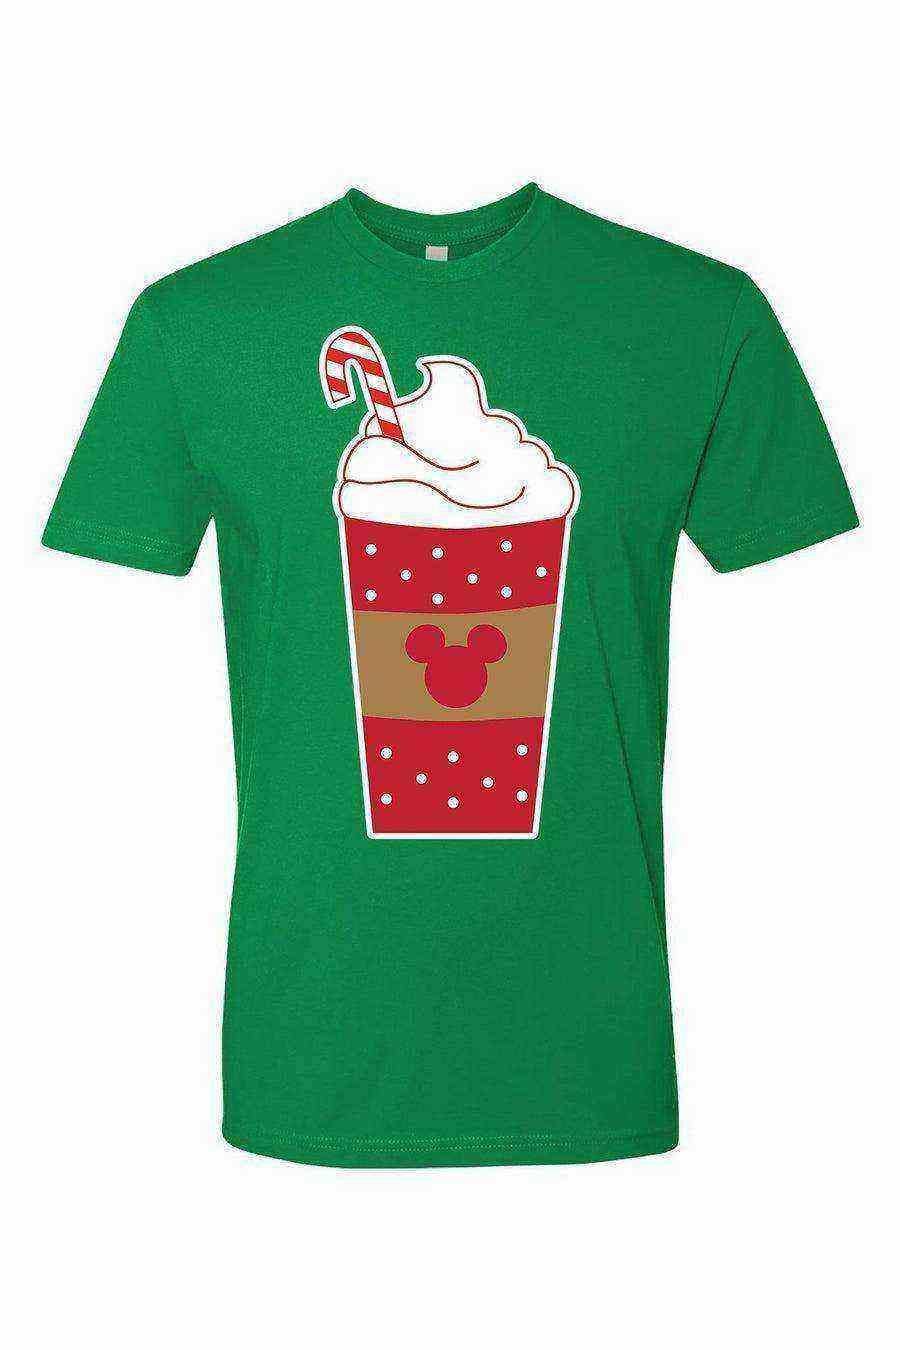 Youth | Christmas Shirt | Peppermint Mocha - Dylan's Tees